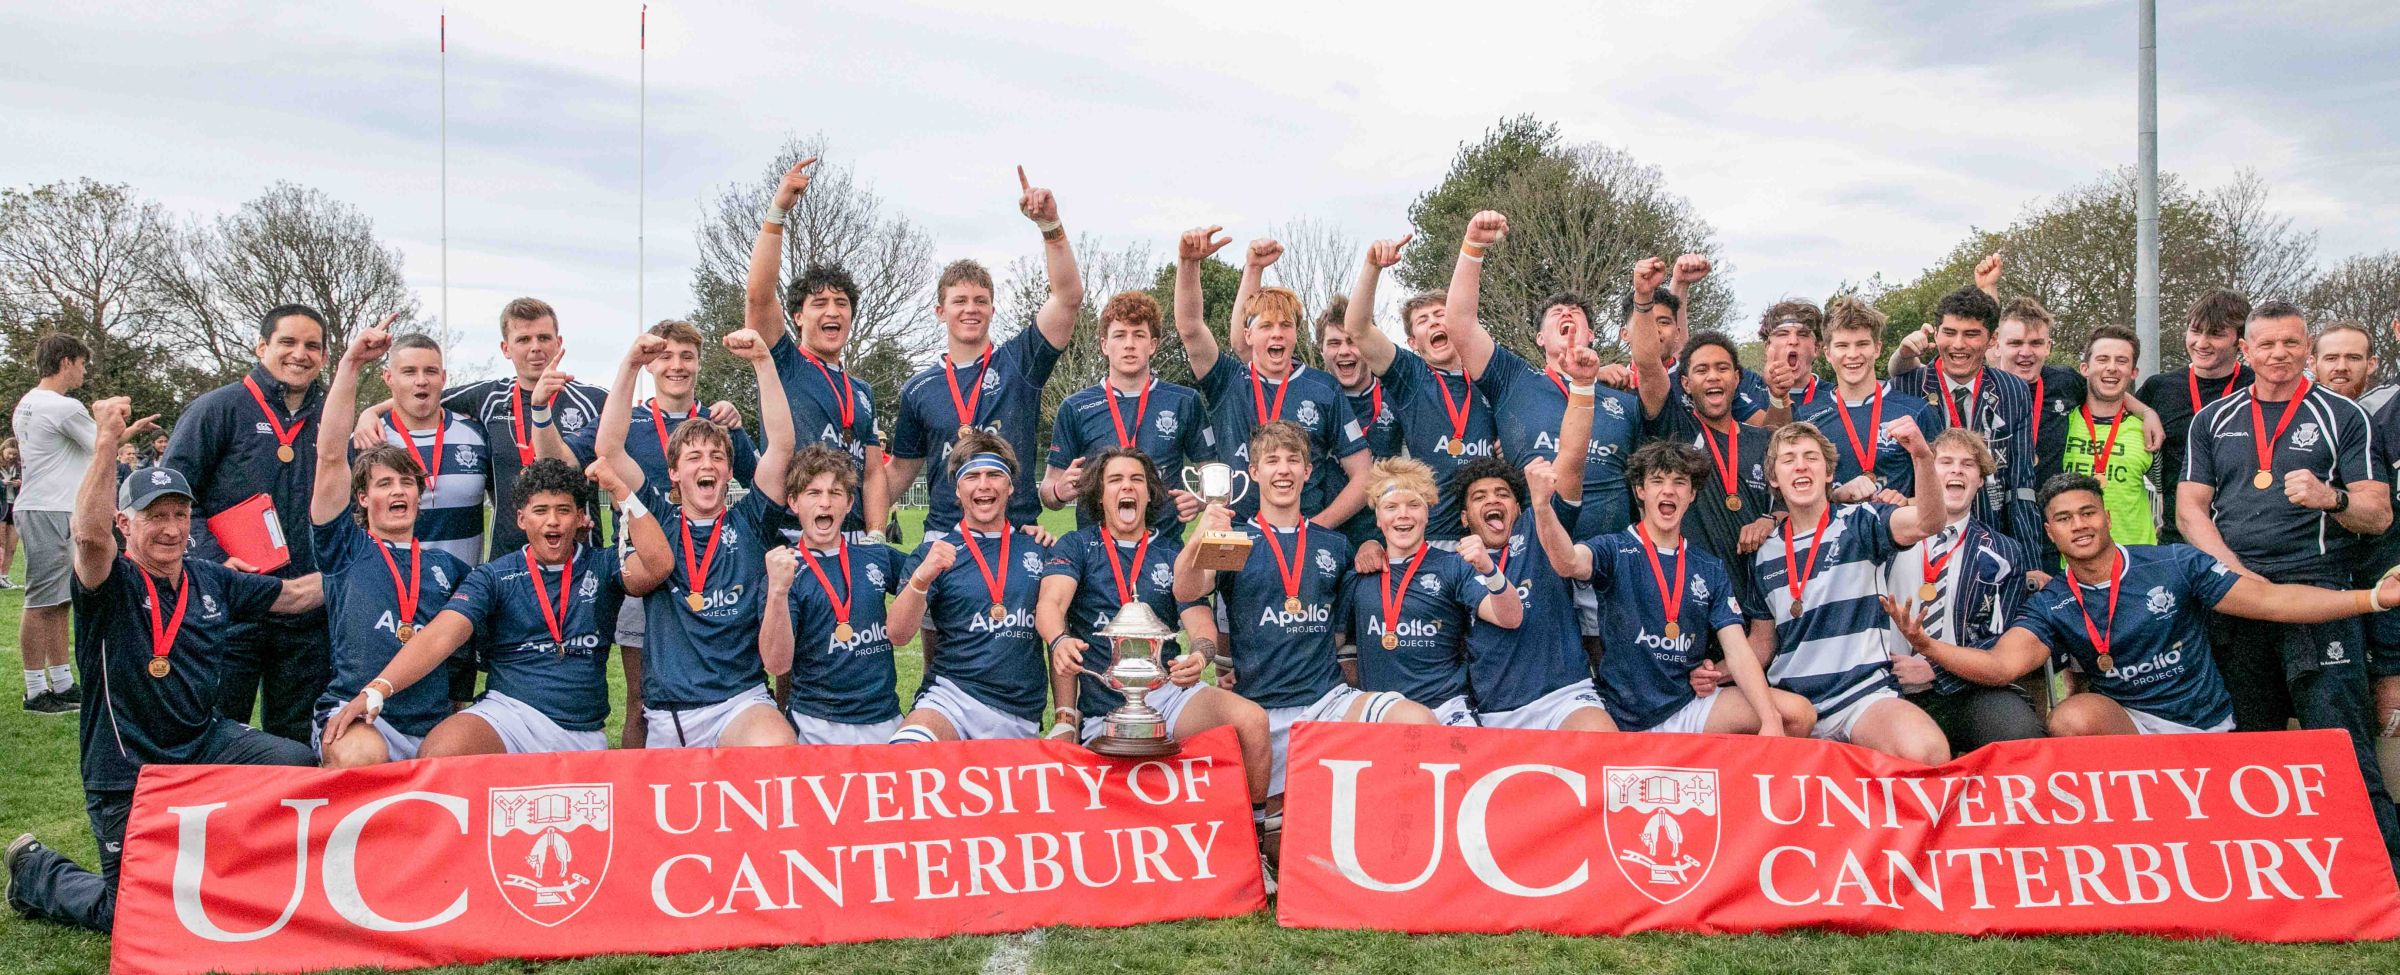 St Andrew's College 1st XV winning UC Cup group photo